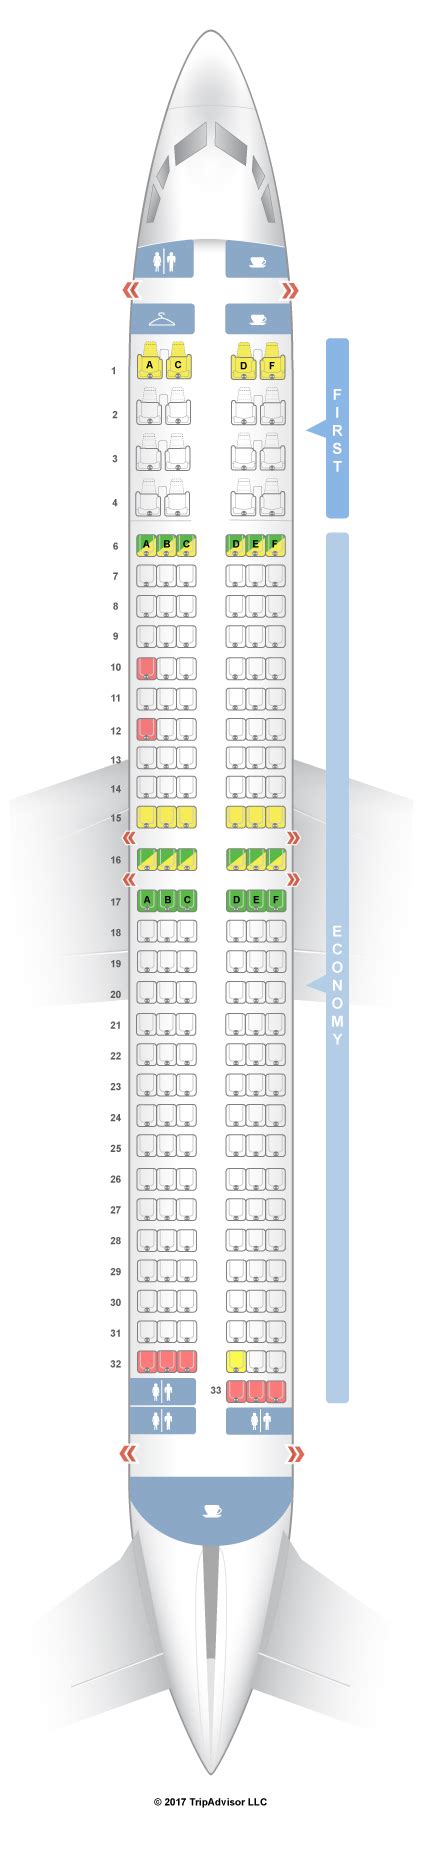 737 900 alaska seat map - Airplane Boeing 737-900 (739) Alaska Airlines with 3 classes and 178 seats on board. Use airplane seat map to find which ones are more comfortable and which should be avoided. Tap the seat on the map to see the details.